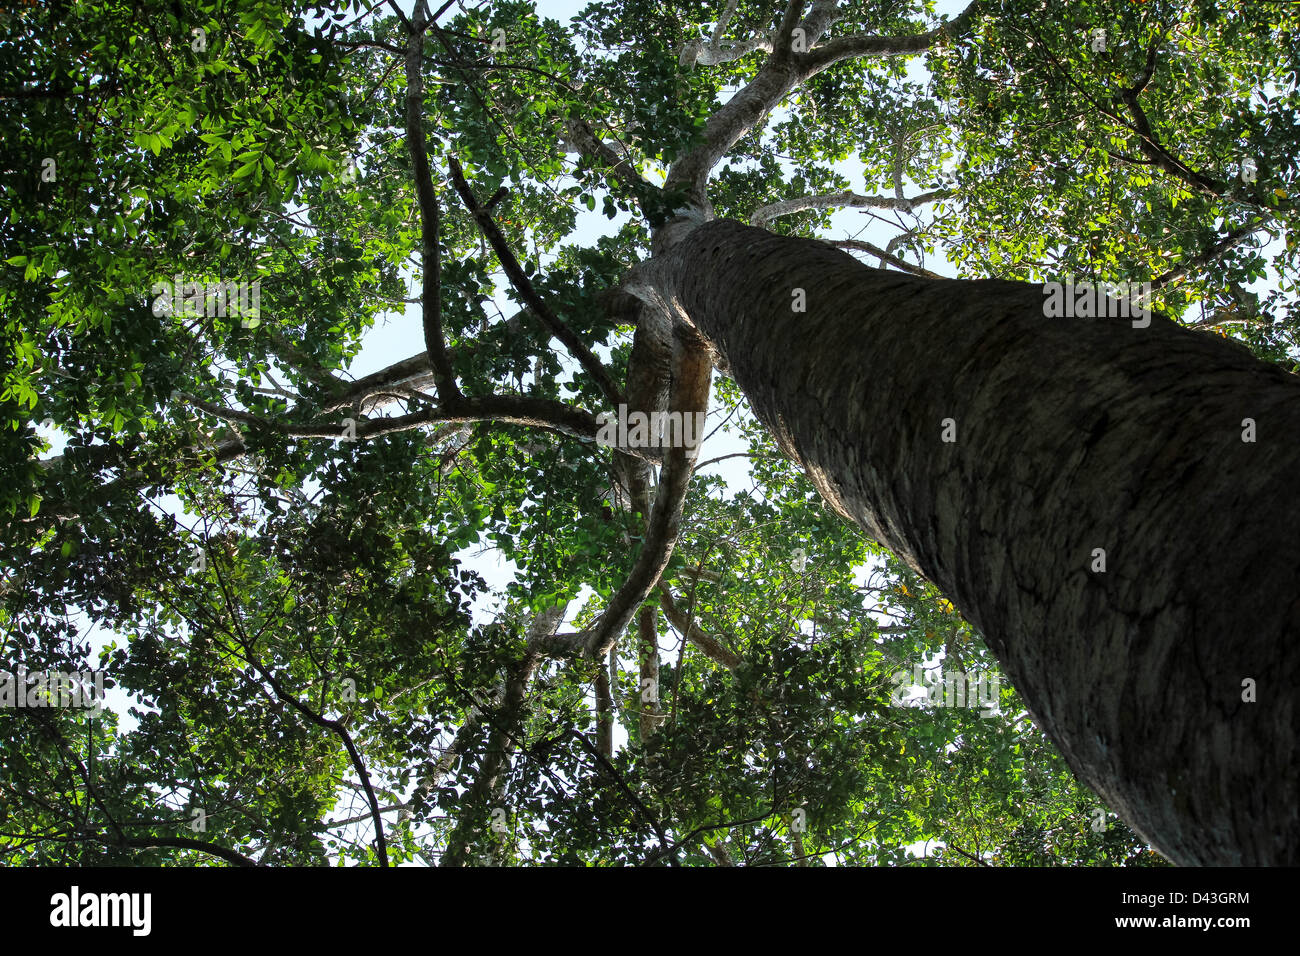 Bigtree at arippa forest Stock Photo